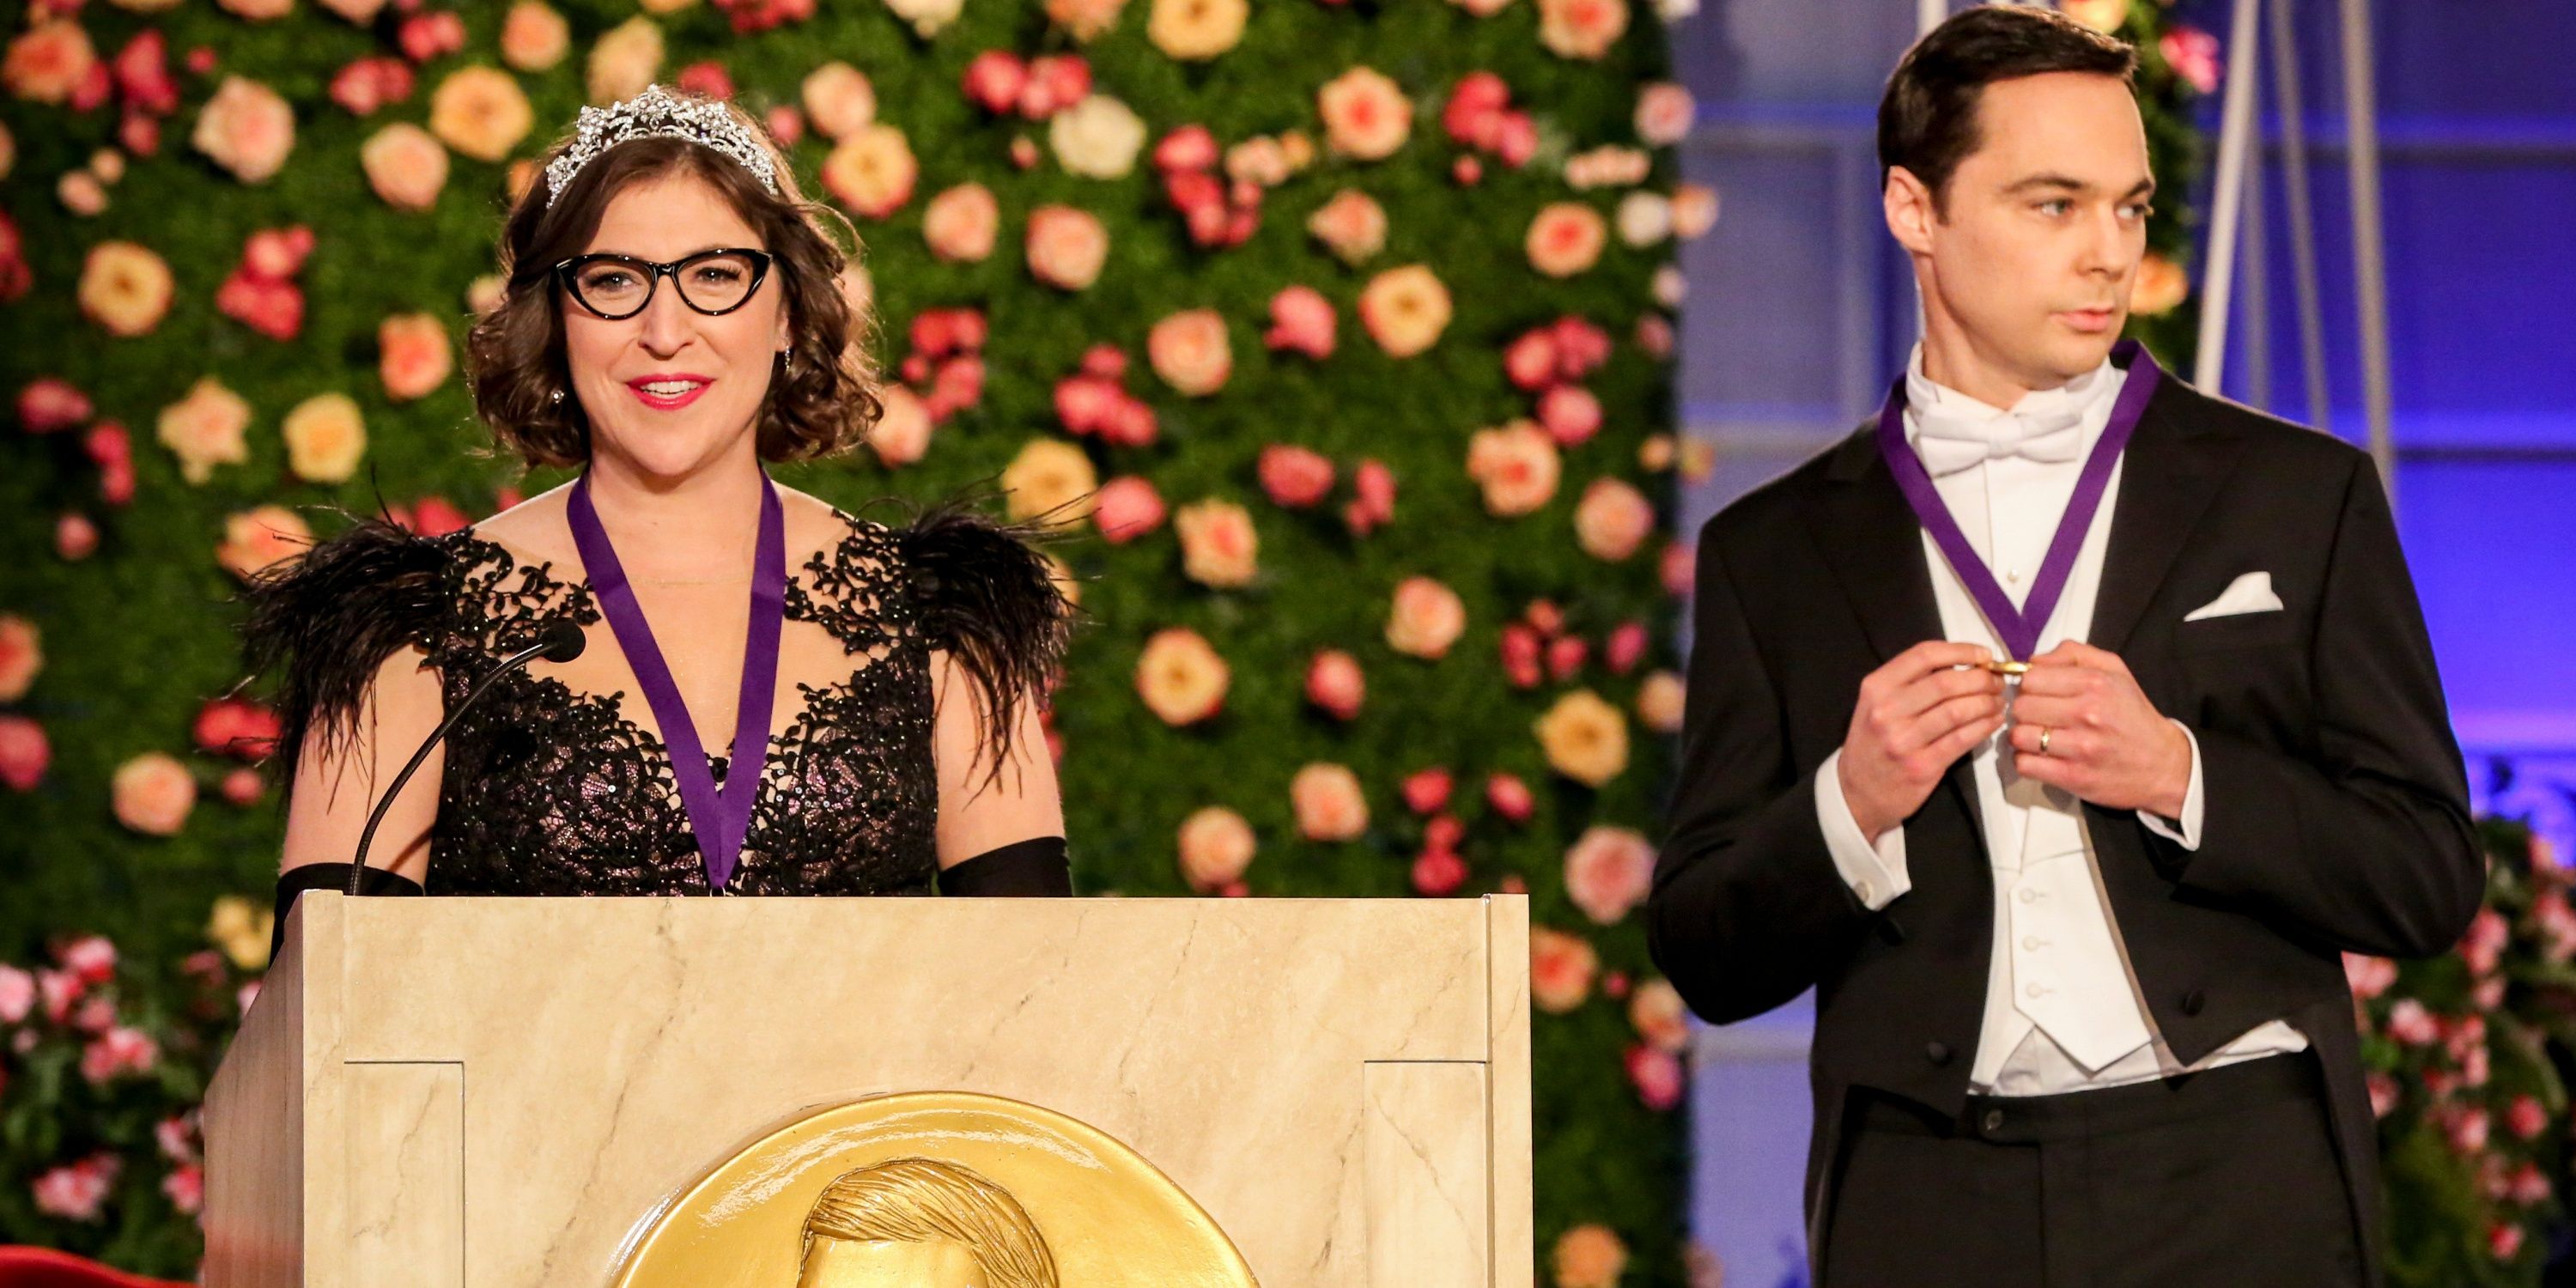 Amy and Sheldon win an award in TBBT